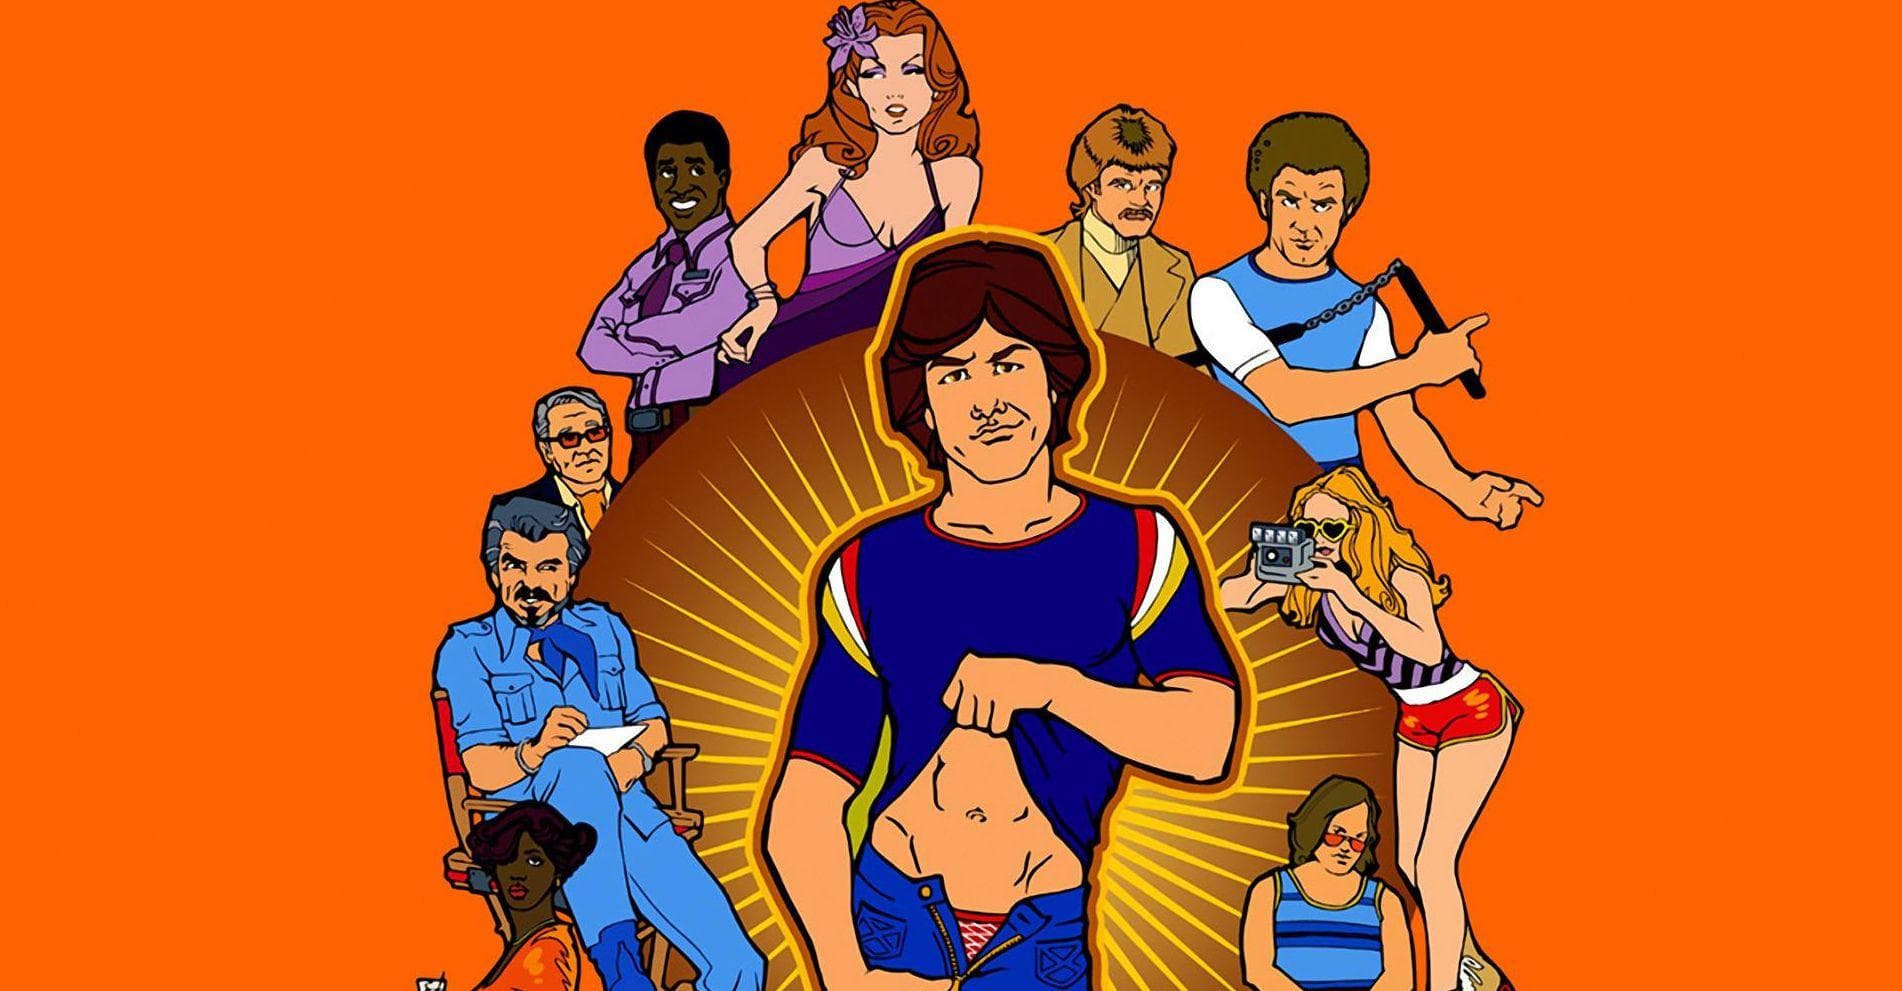 You Sexy Thing (From Boogie Nights) - song and lyrics by